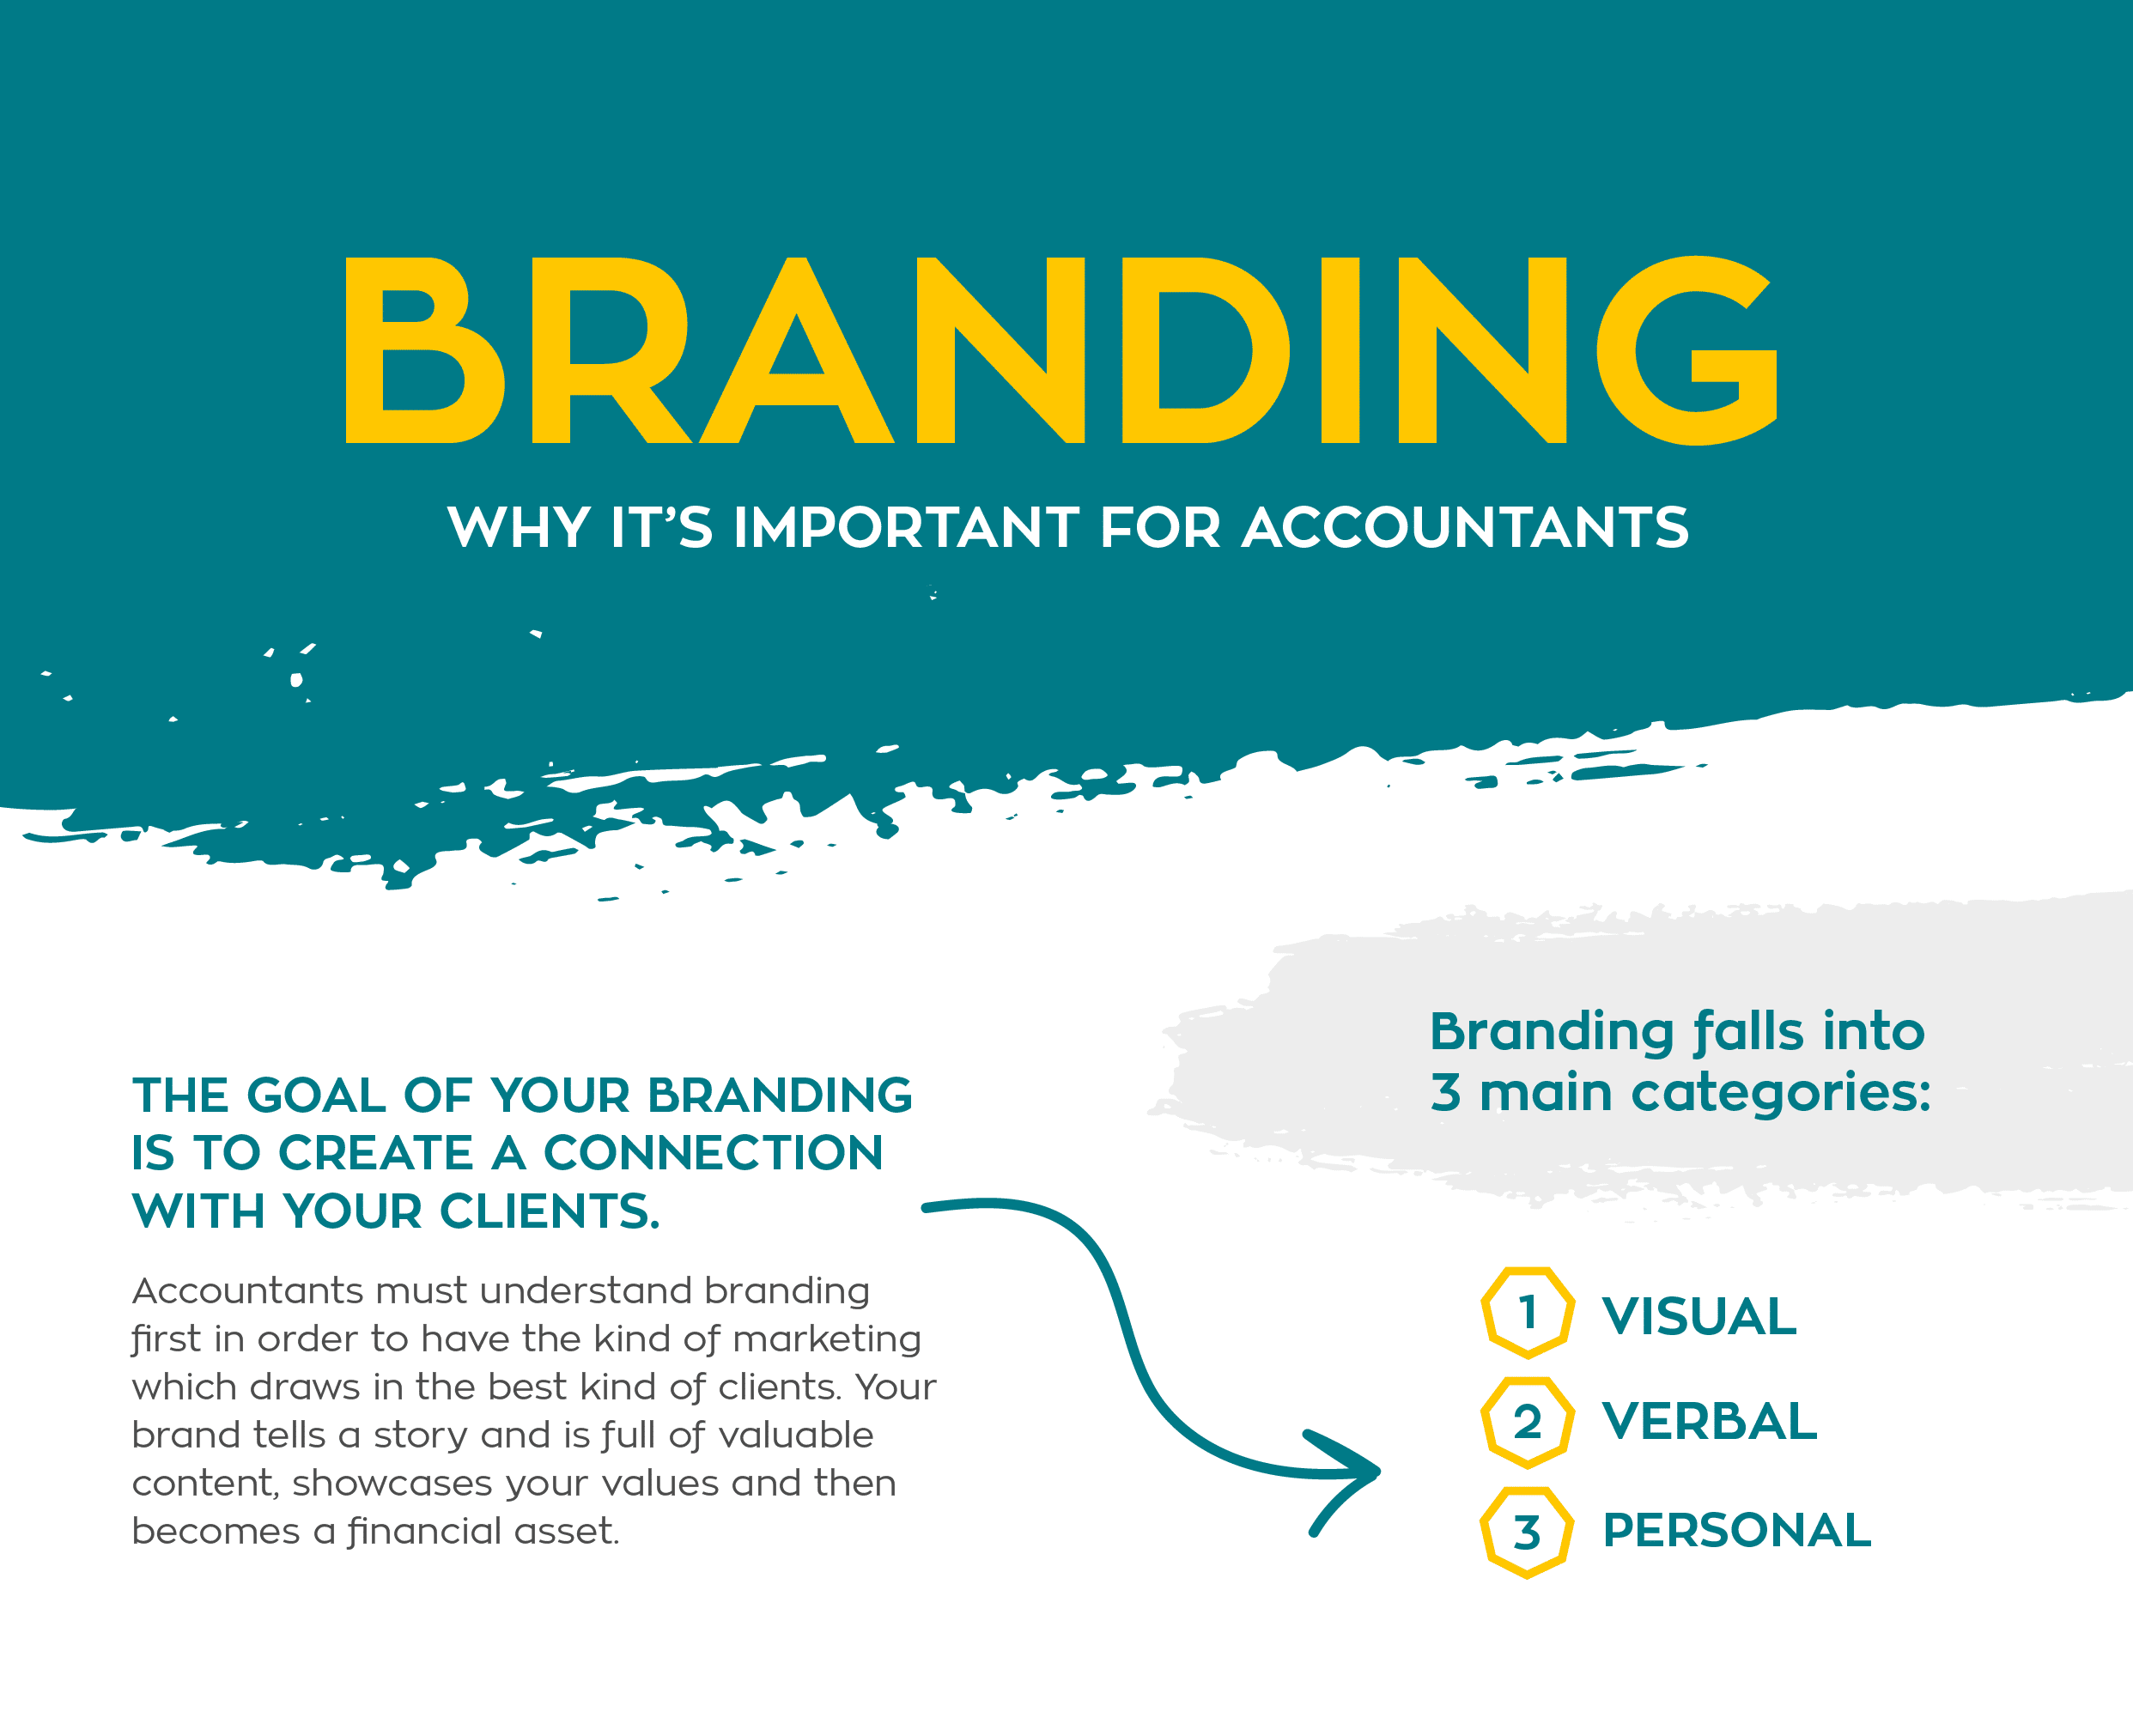 A visual guide to why branding is important for accountants